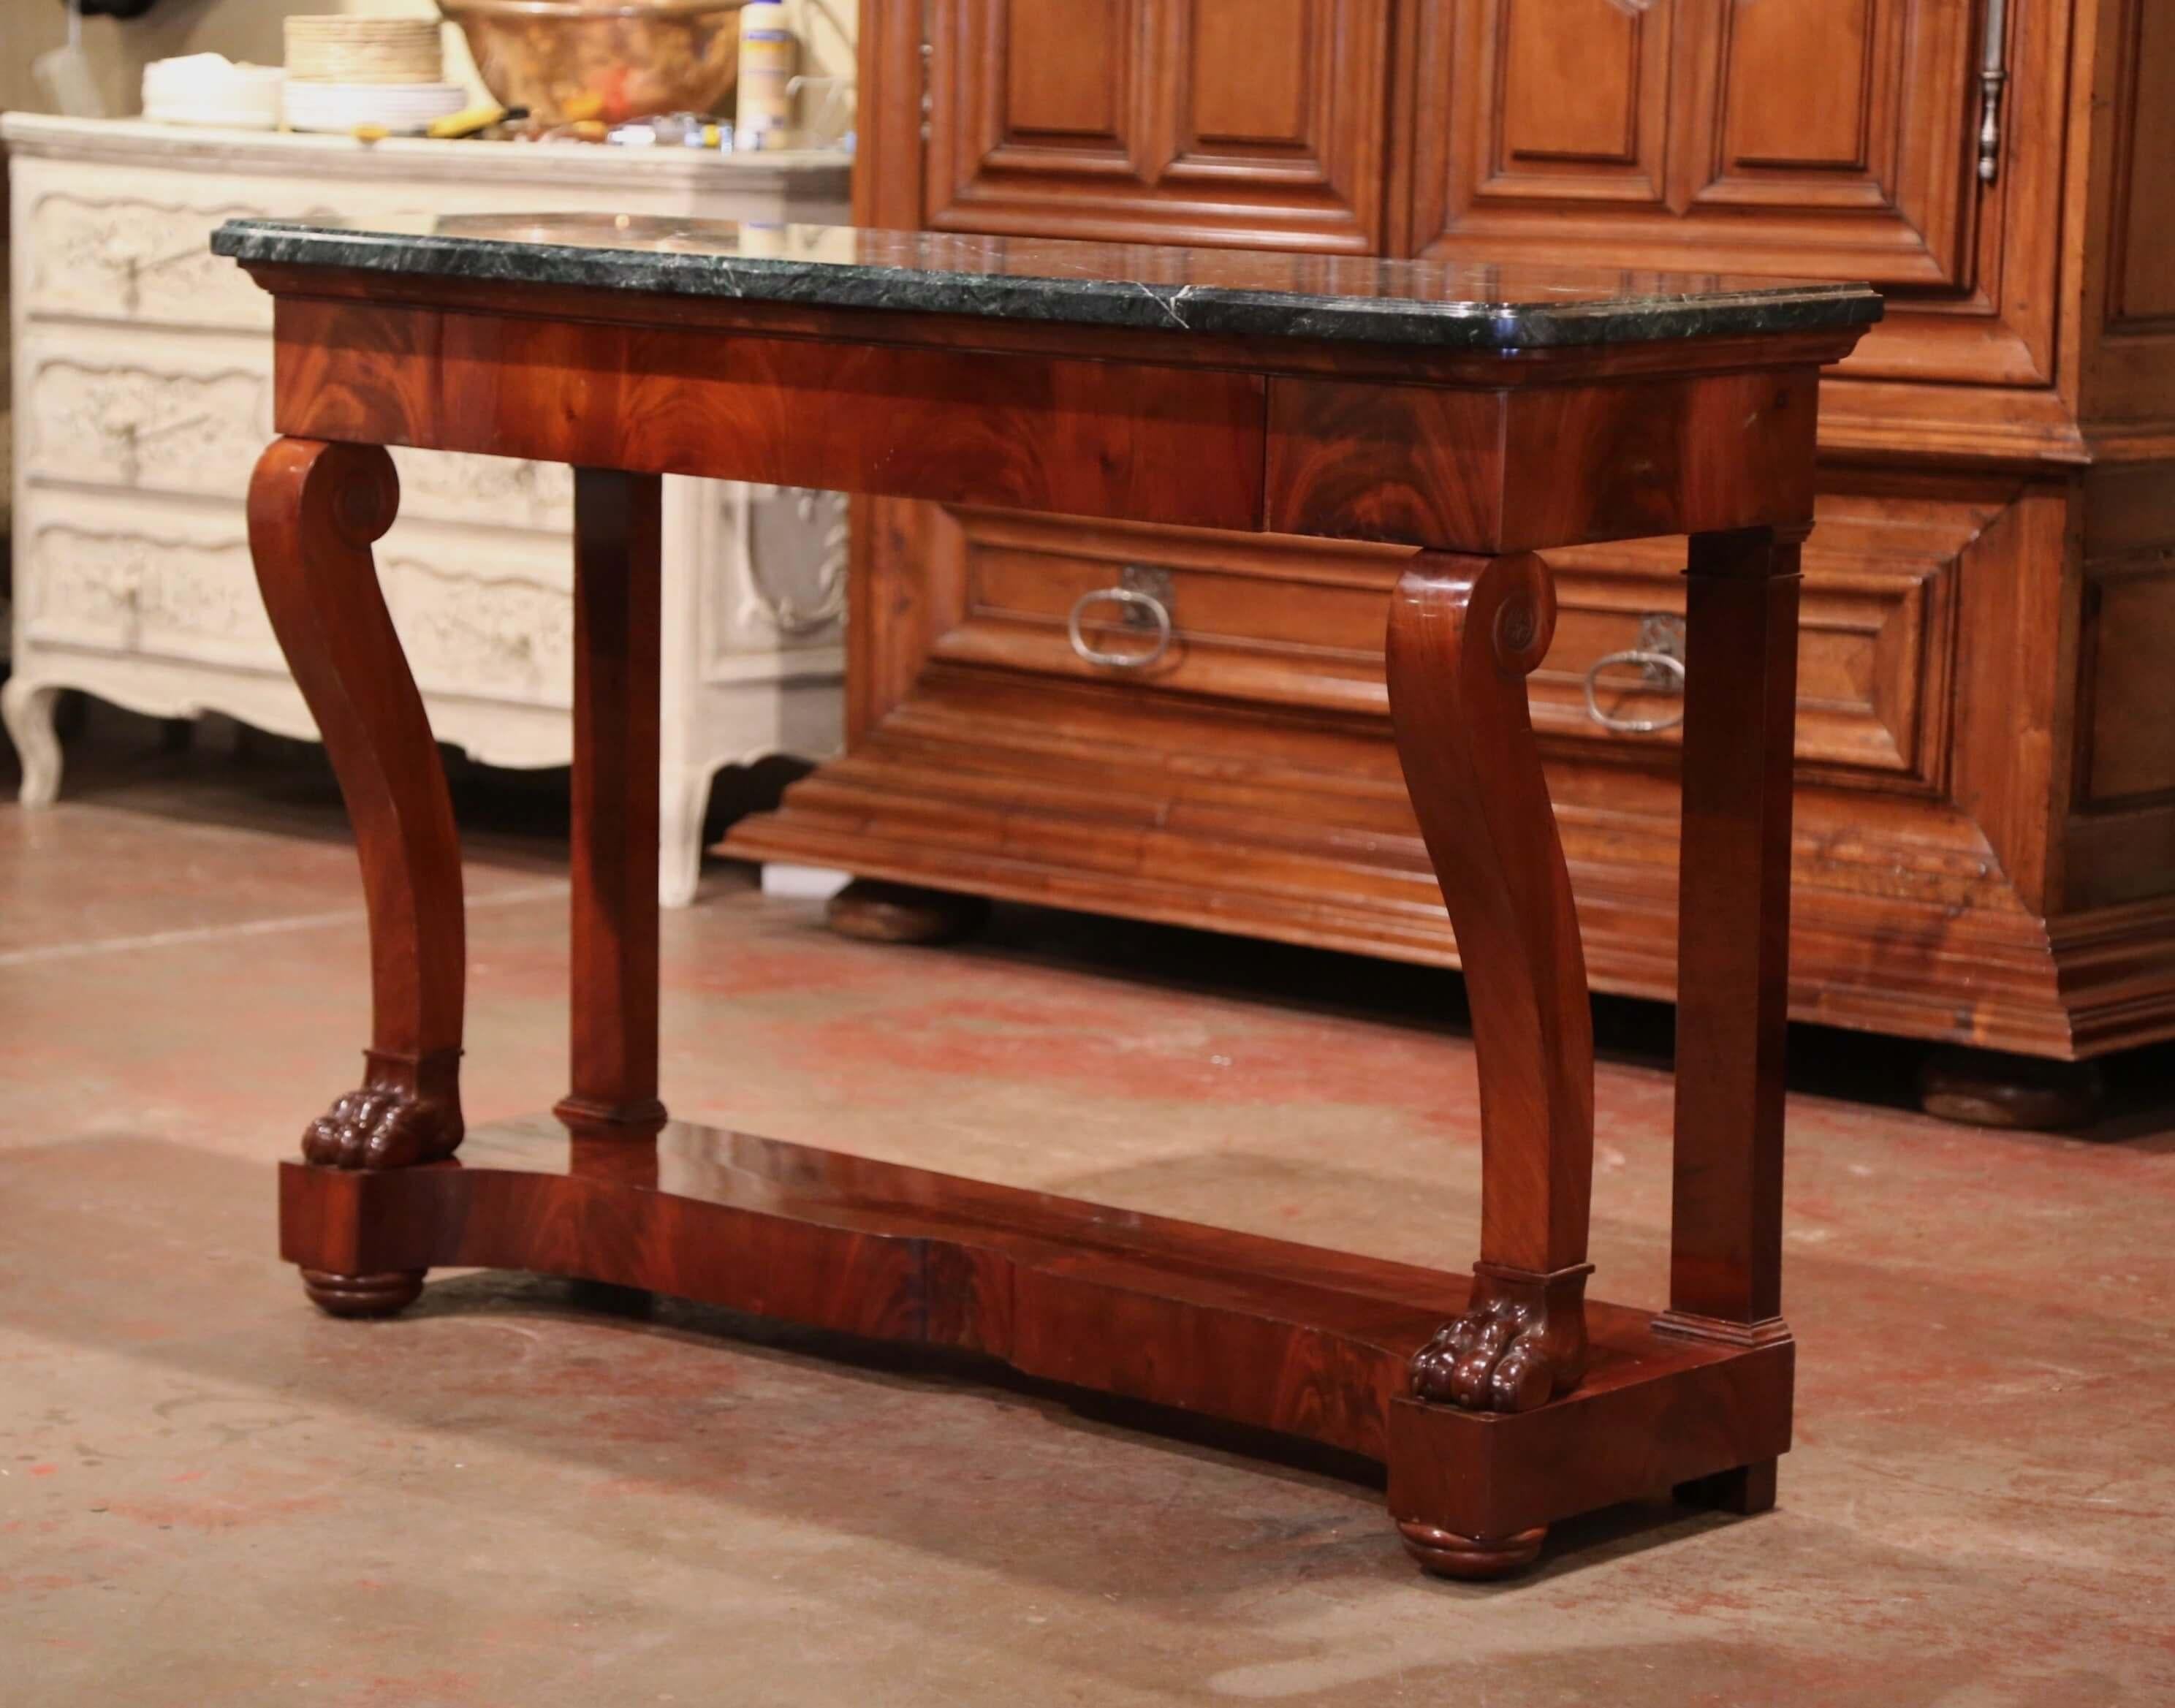 This elegant antique console was crafted in France, circa 1880. Standing on scrolled front legs ending in paw feet, and pilaster legs in the rear over a stretcher platform bottom shelf, the table features a large drawer across the front; the surface